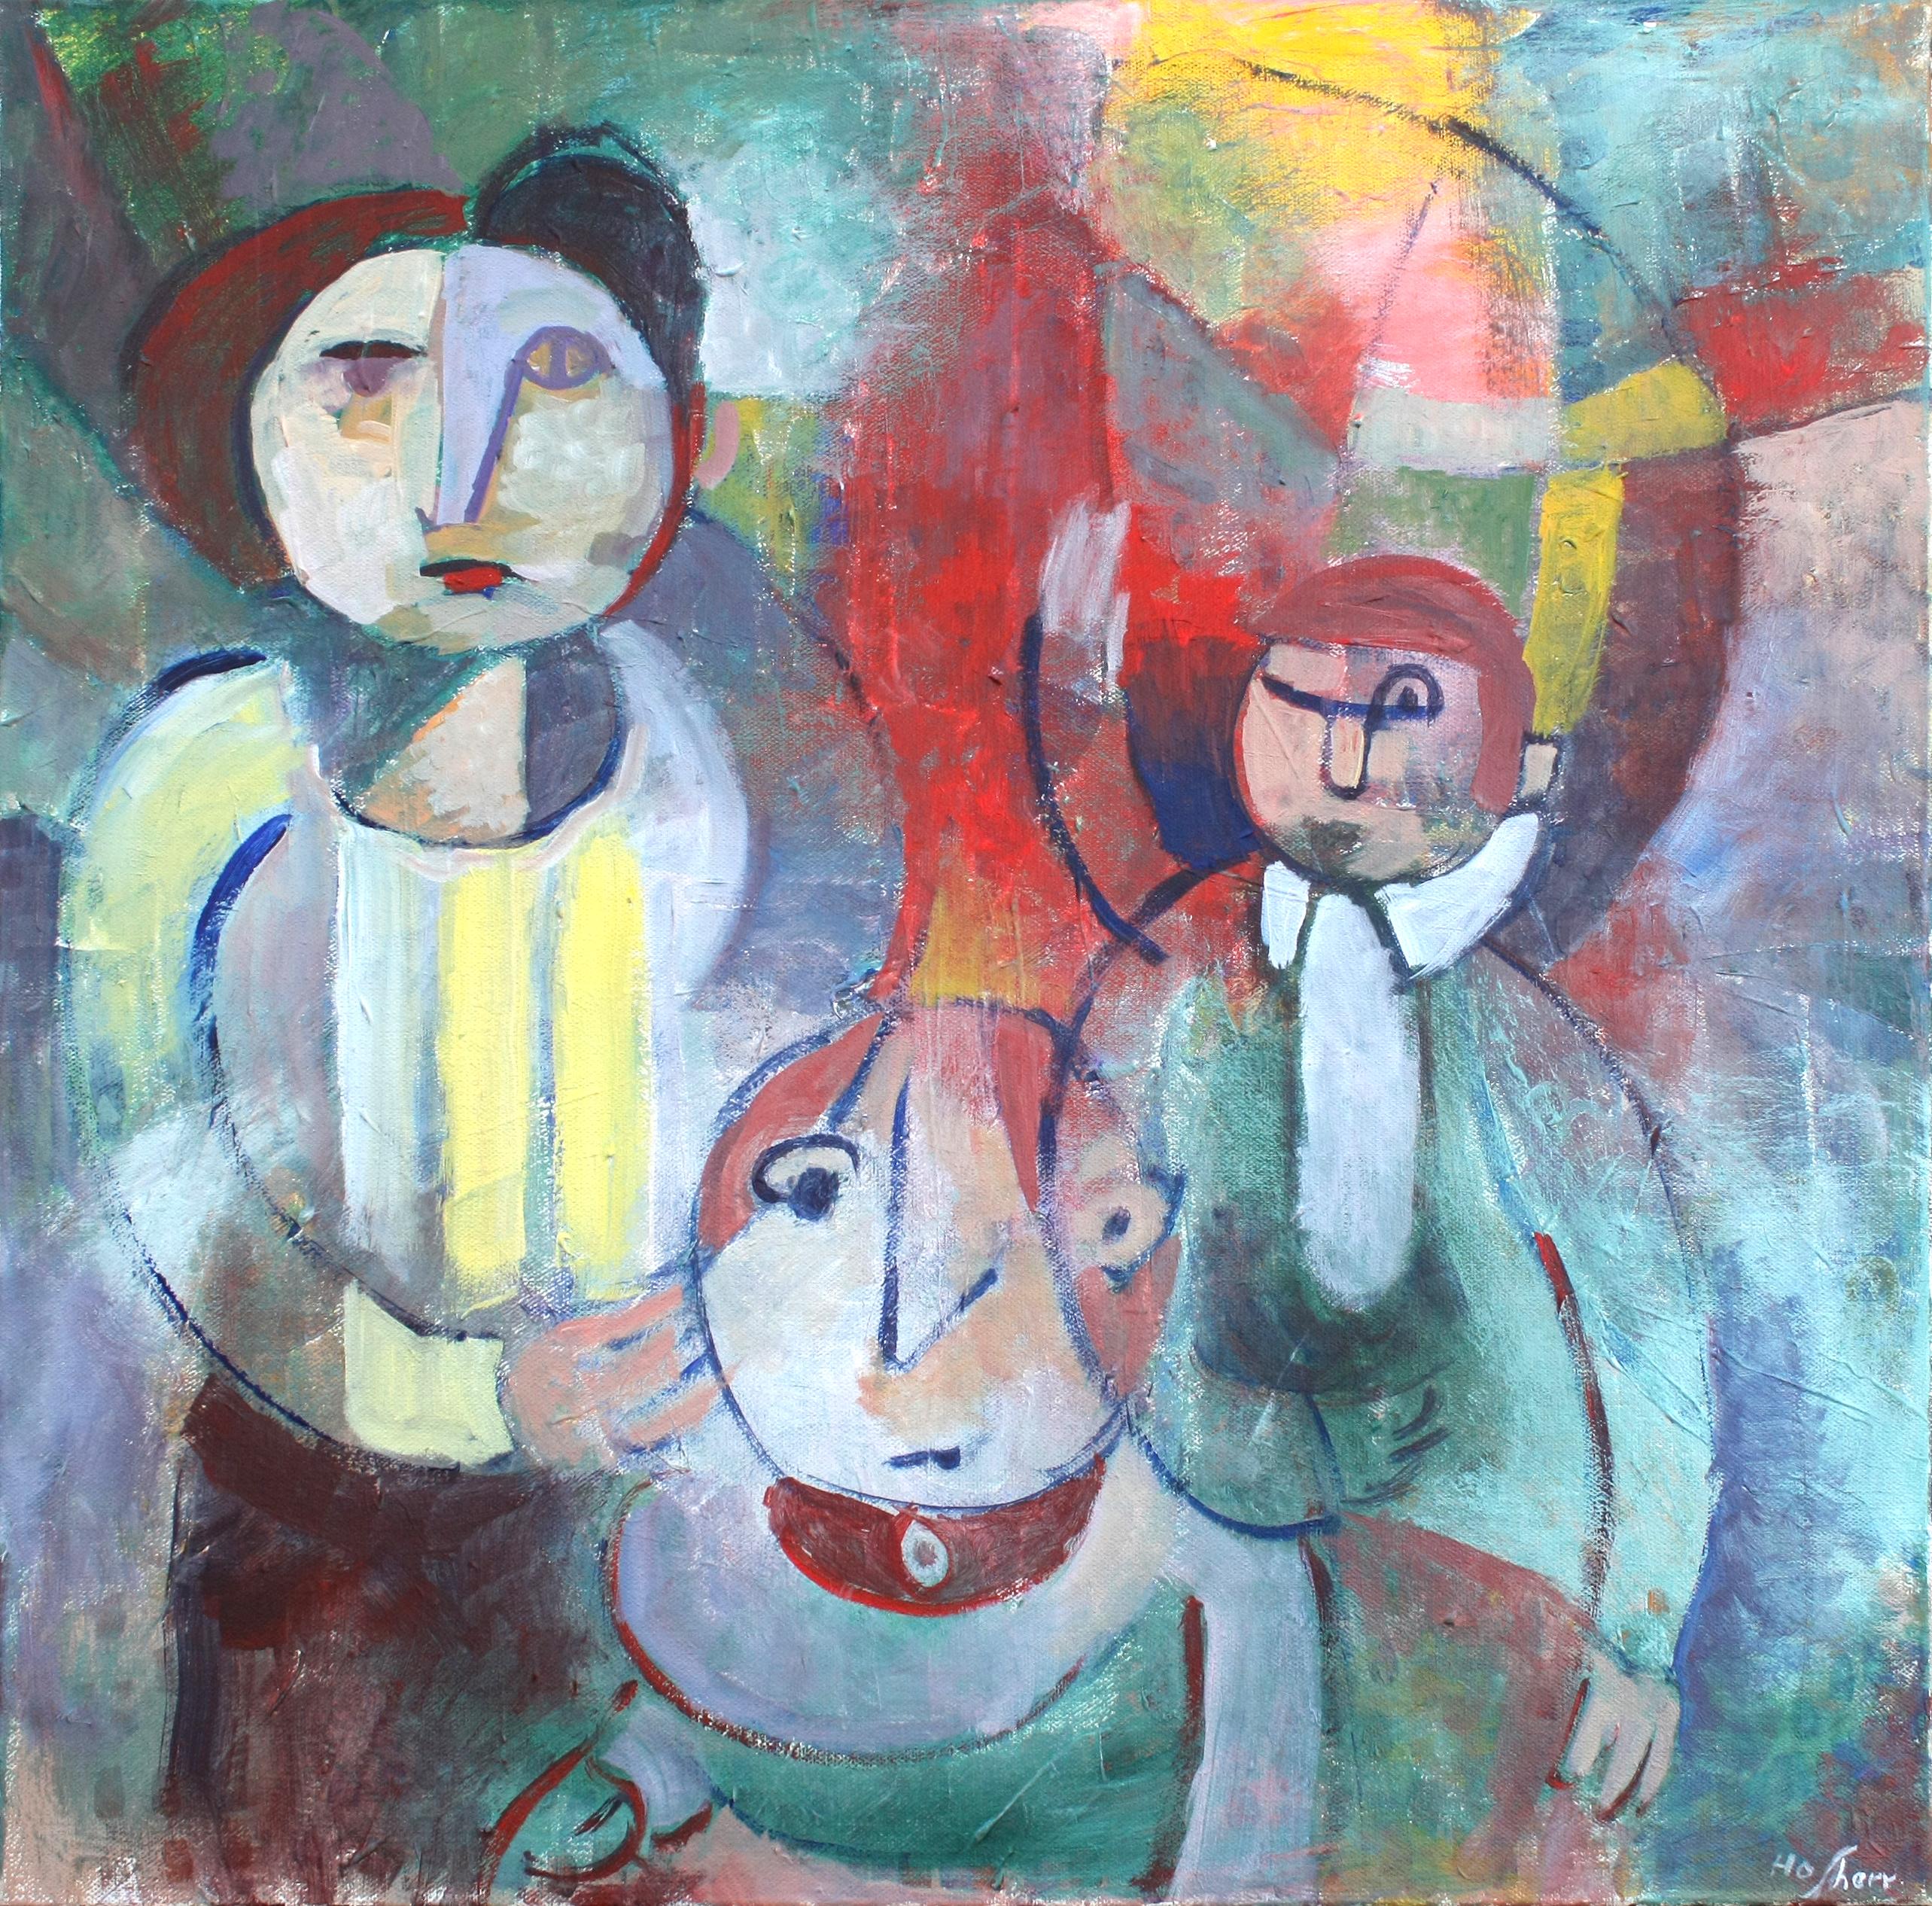 <p>Artist Comments<br>Inspired by the work of Paul Klee, this painting features a group of figures stripped of realism, replaced by muted, textured colors and intertwined geometric lines and shapes. They are not specific individuals but rather